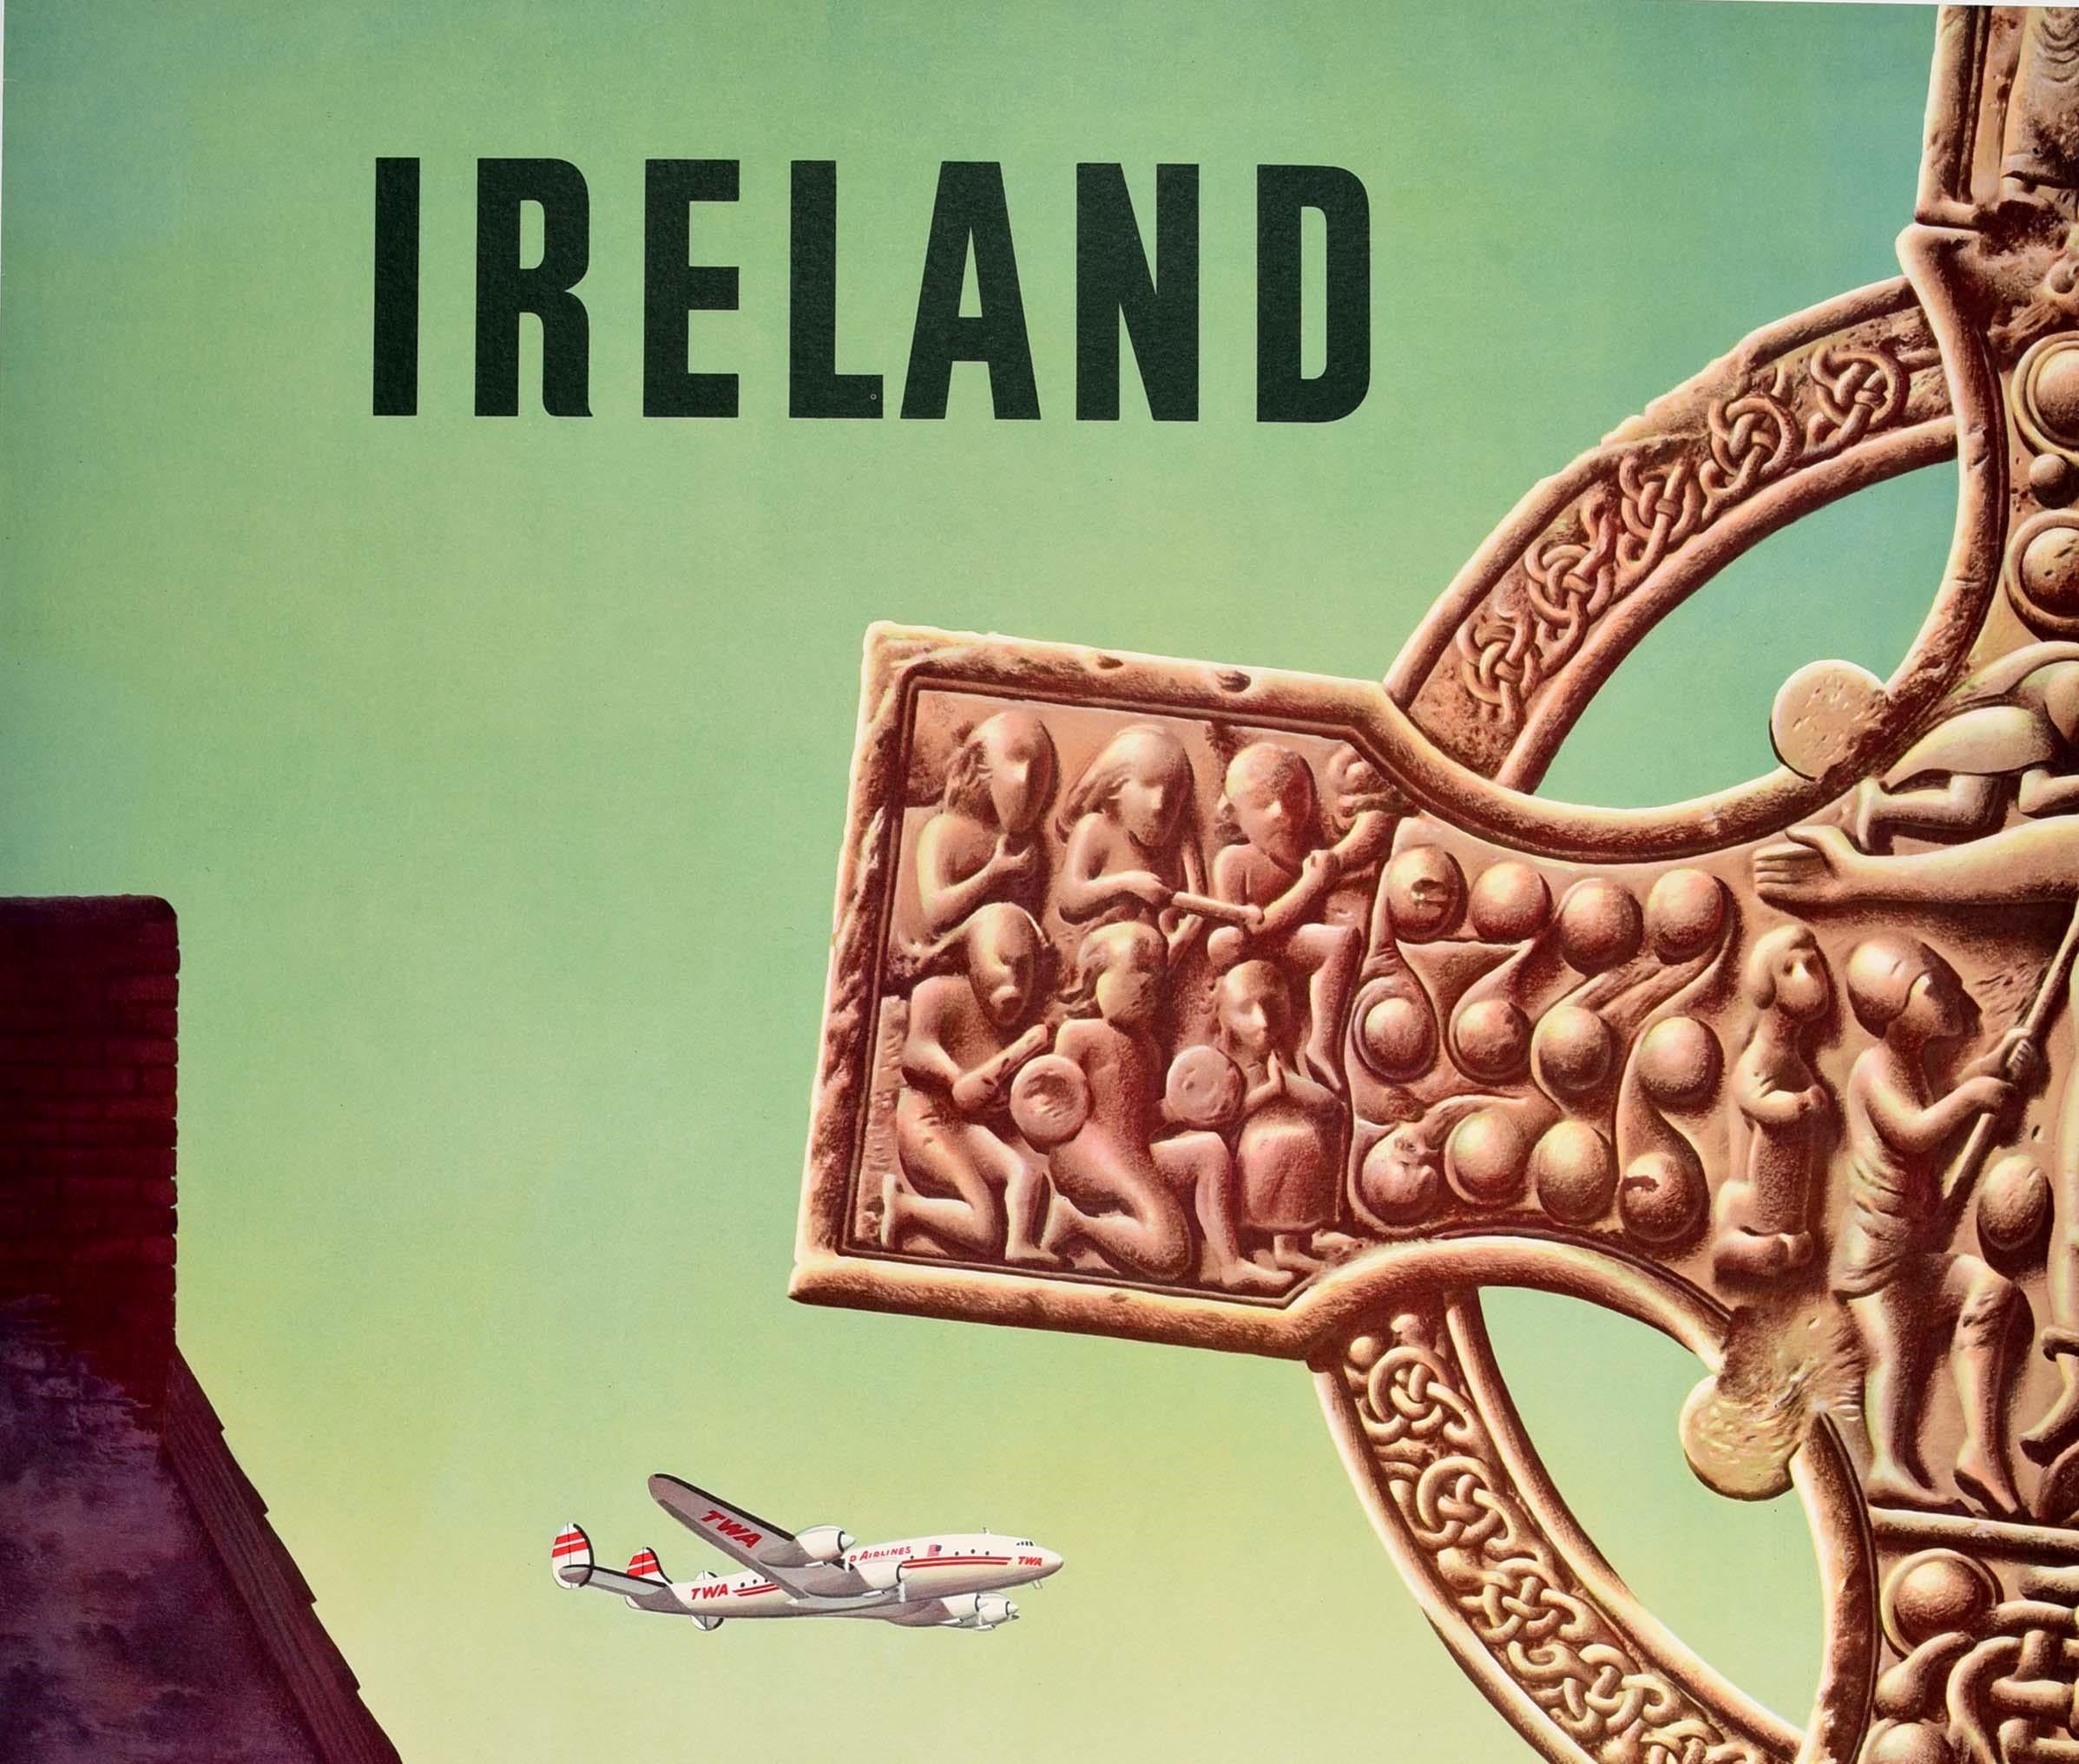 Original vintage travel poster for Ireland Fly TWA Trans World Airlines featuring a great design depicting Lockheed Constellation plane flying over the Irish countryside with a smiling lady greeting a man on a horse in front of a cottage with